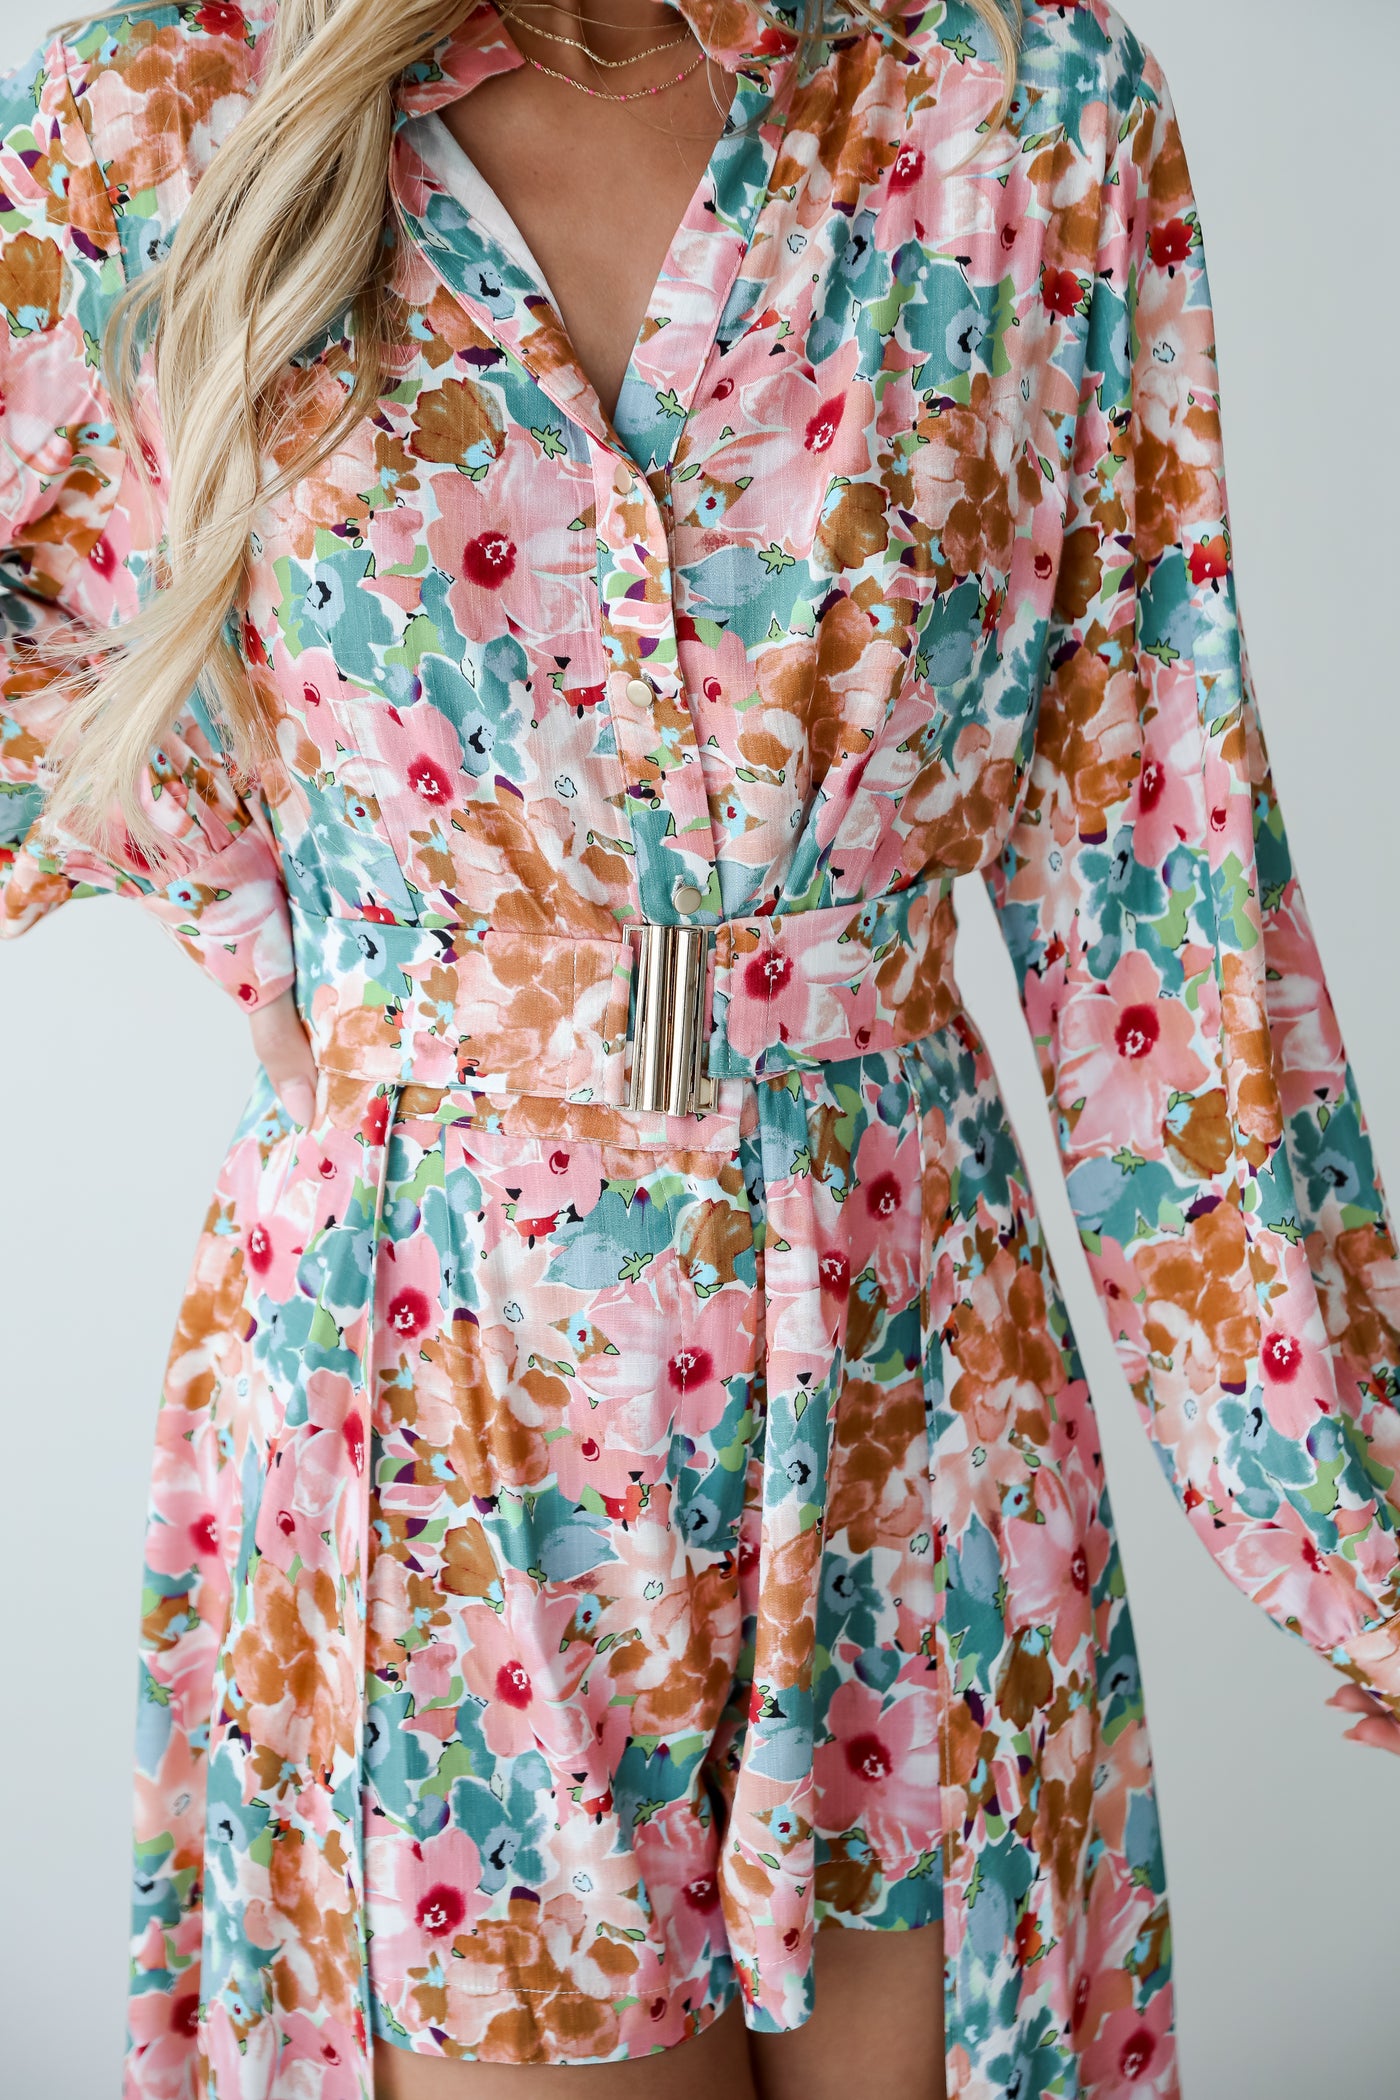 floral dress for women